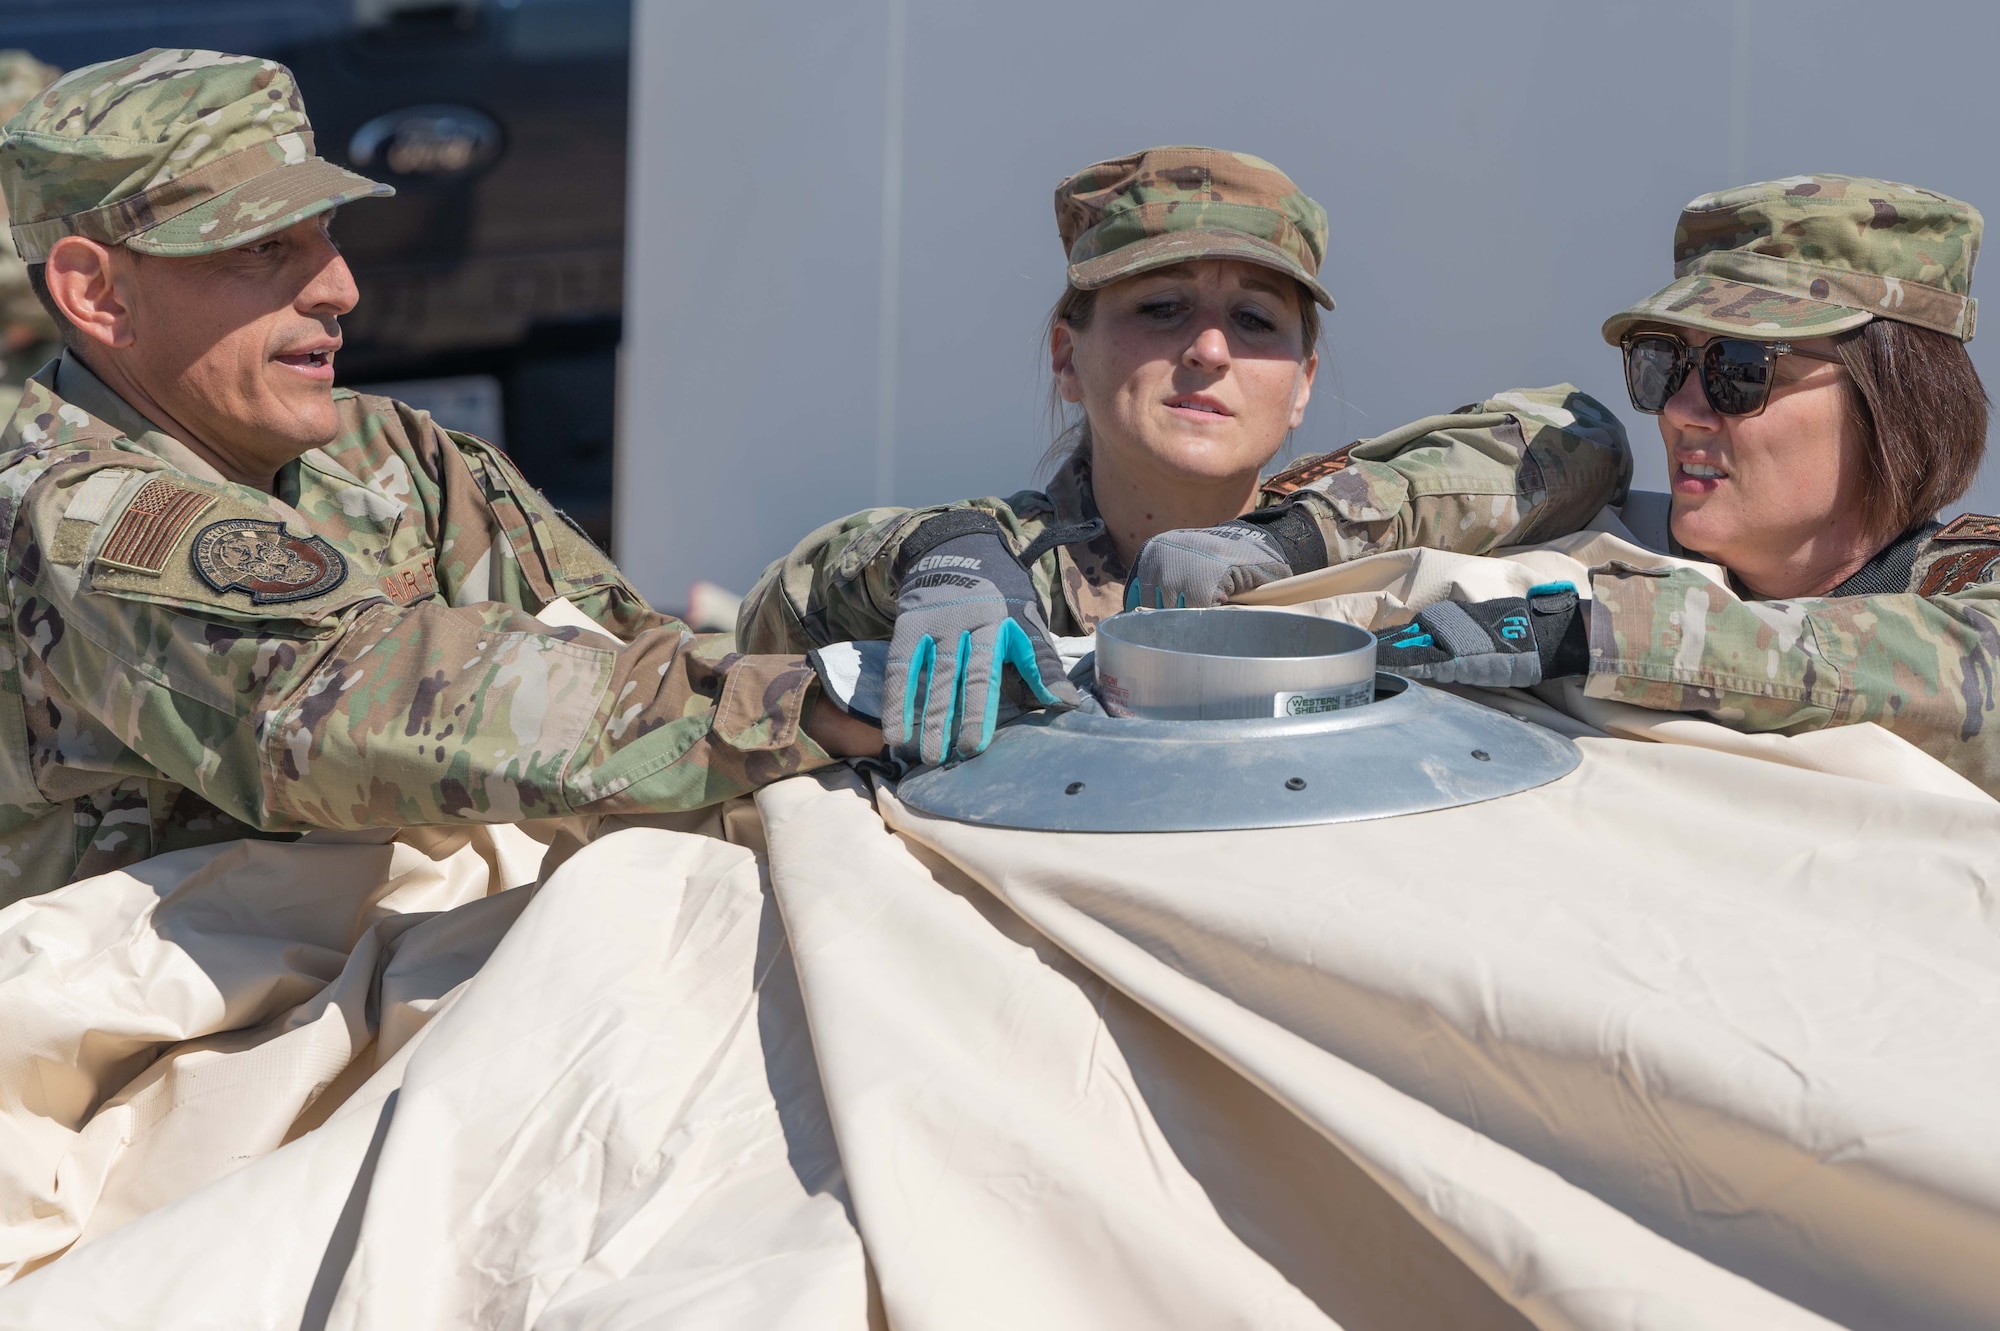 From left, Staff Sgt. Alejandro Guzman, Tech. Sgt. Christine Sulwer, and Master Sgt. Rachael Kargol, 162nd FSS Specialists, erect a massive tent structure for use during an in-person combined training event with other Air and Army National Guard units this week in Las Vegas.